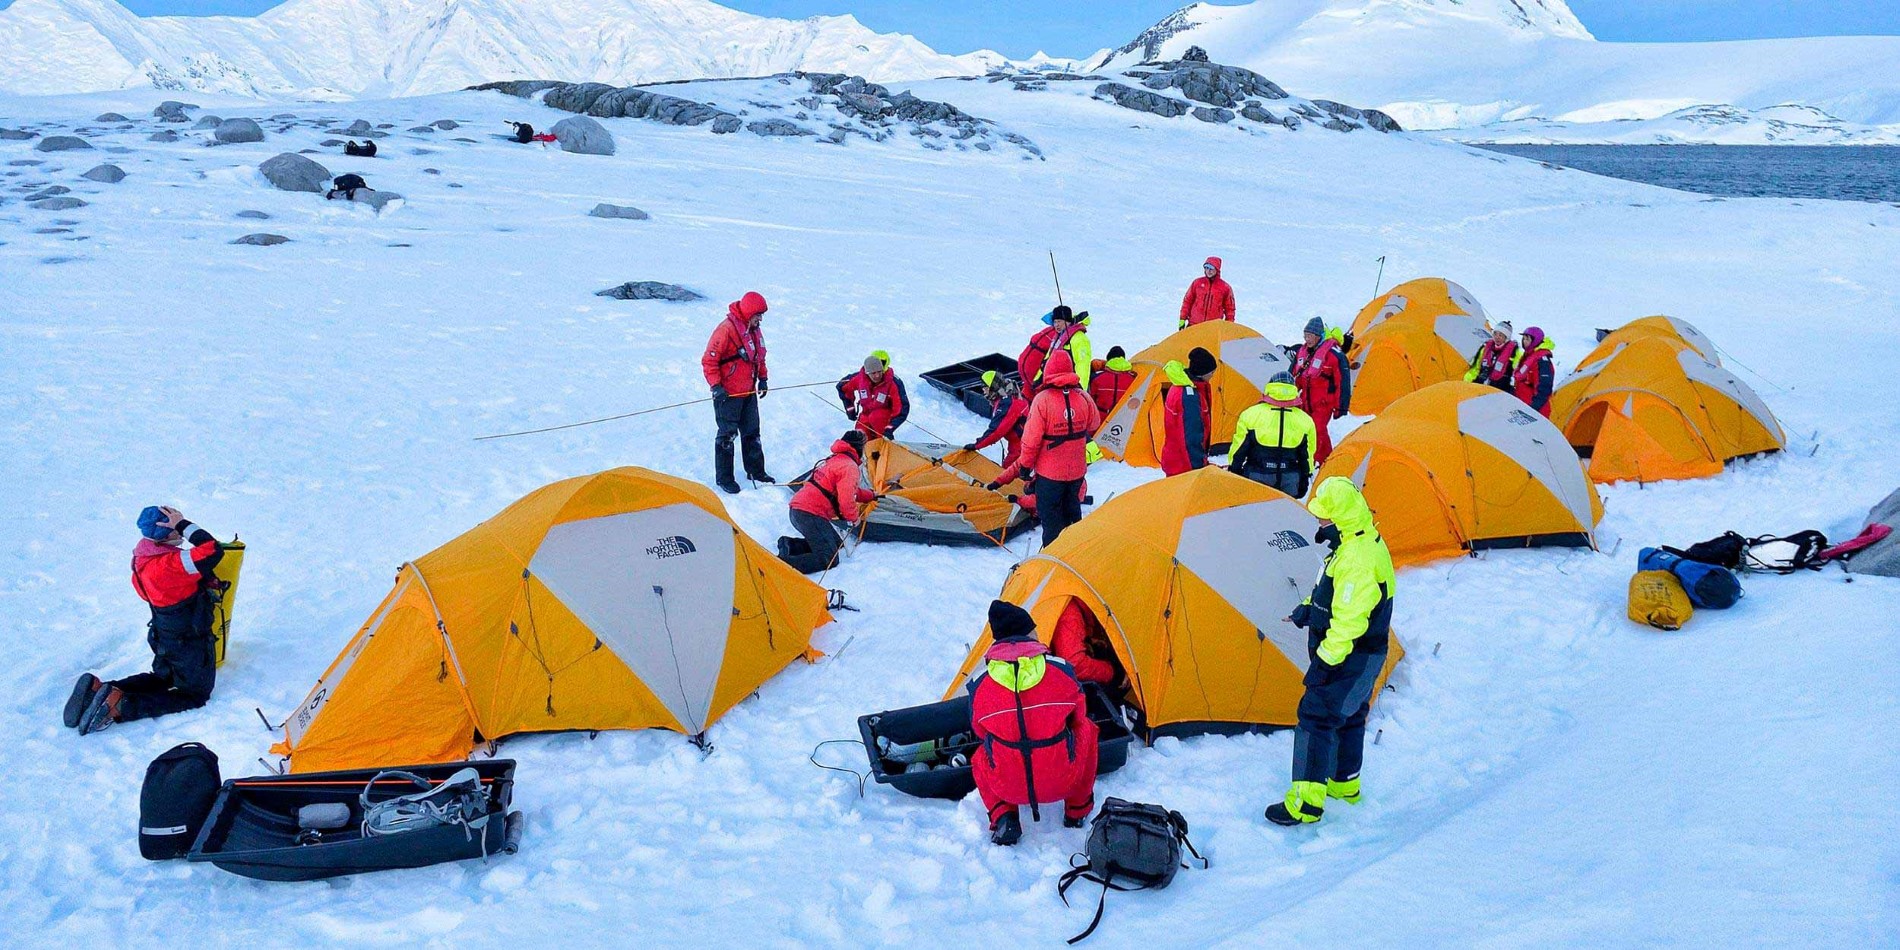 Group of tents being raised in a snowy antarctic landscap